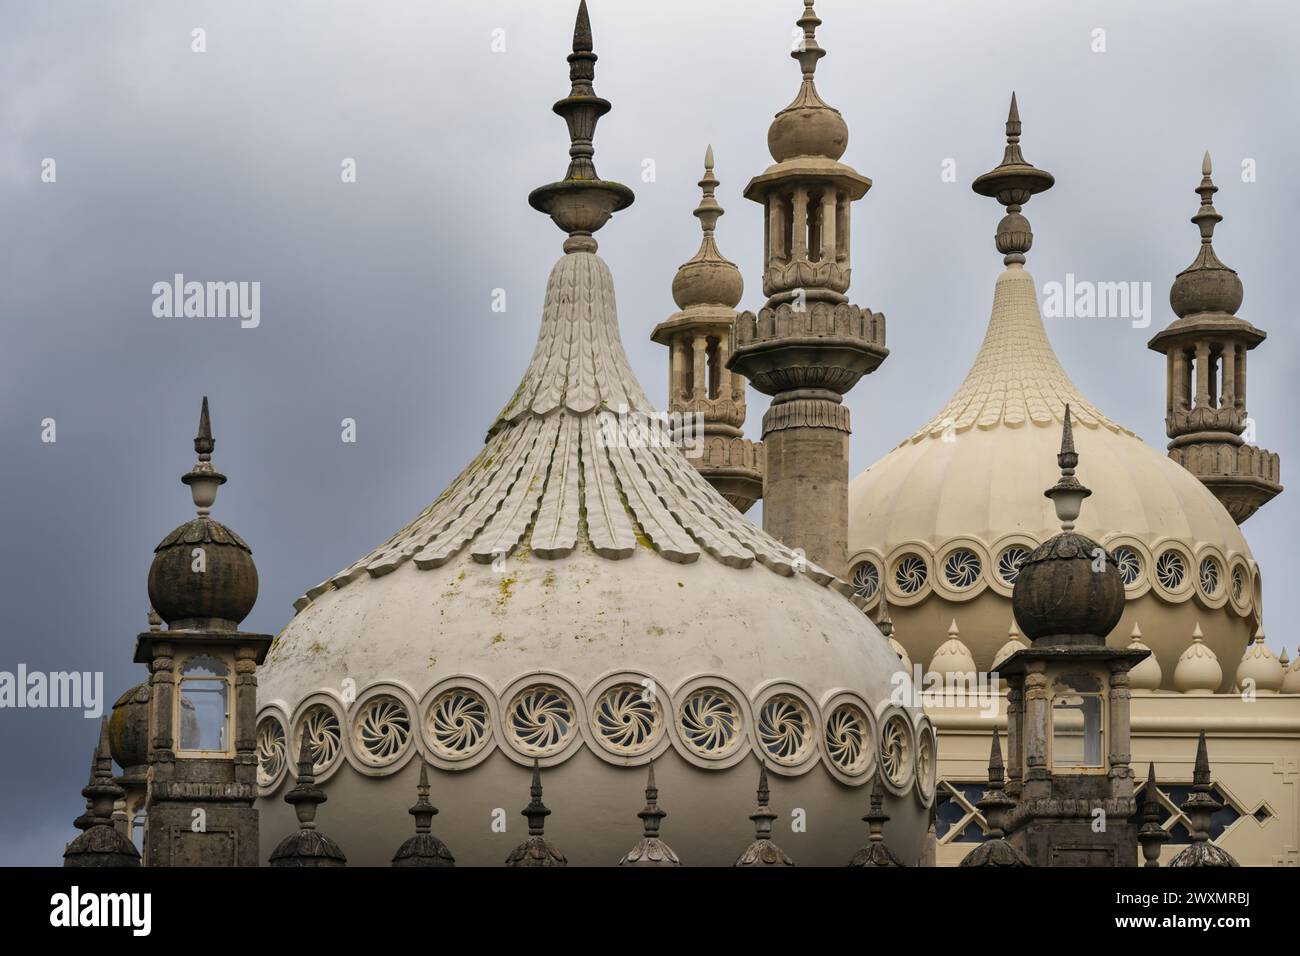 Brighton pavilion rooftop with its domes and minarets Stock Photo